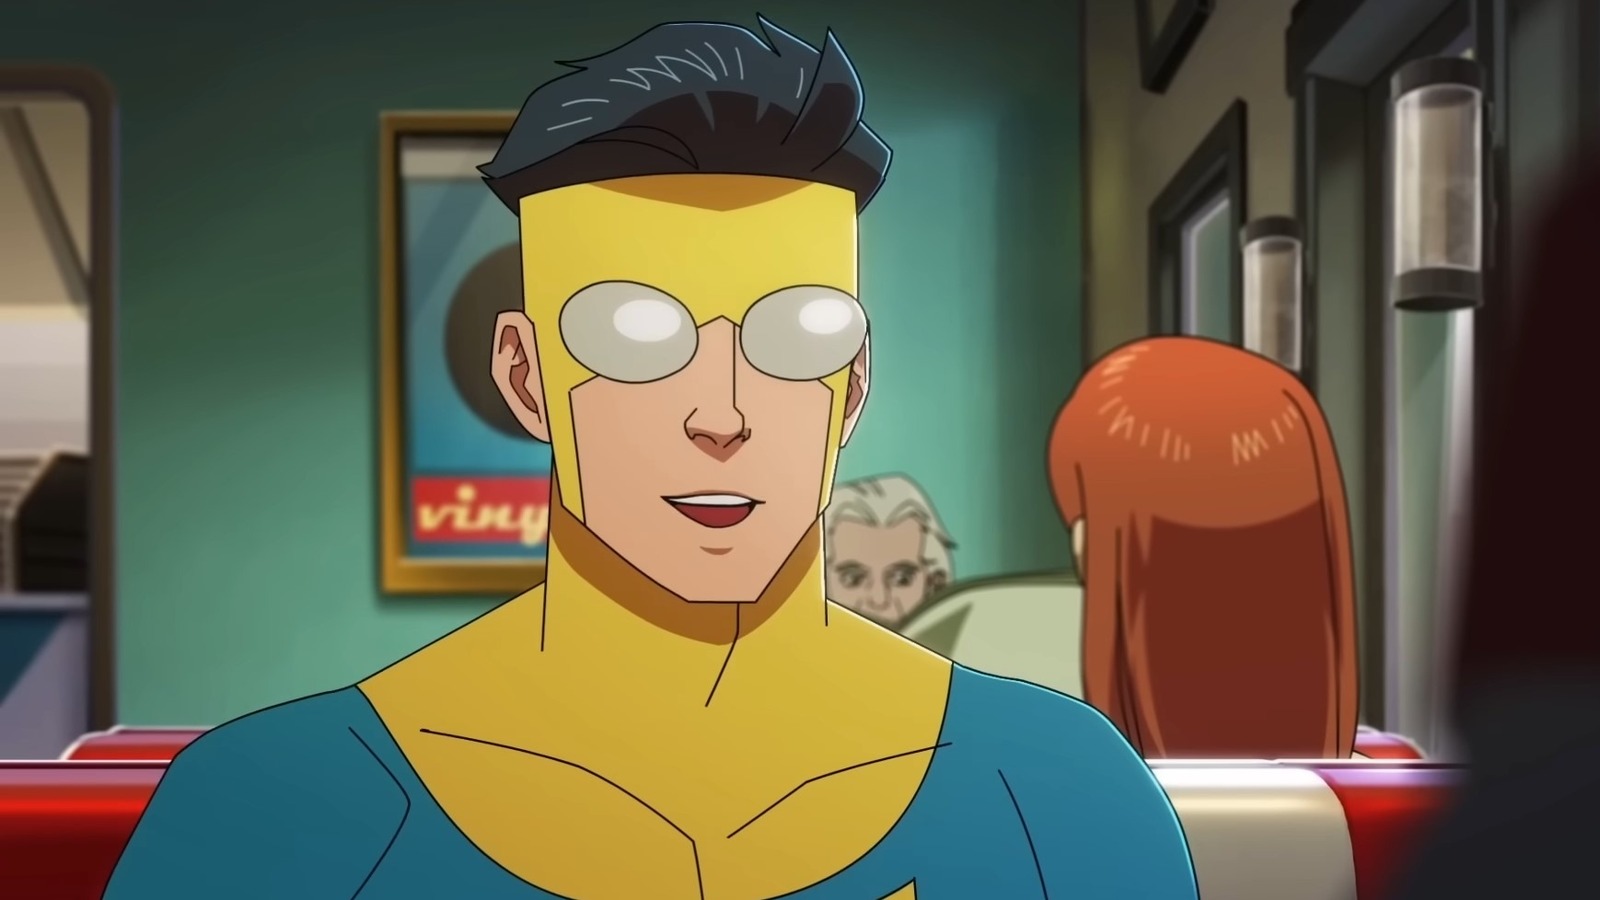 Invincible Season 2 Will Feature a Fresh Take on the Multiverse